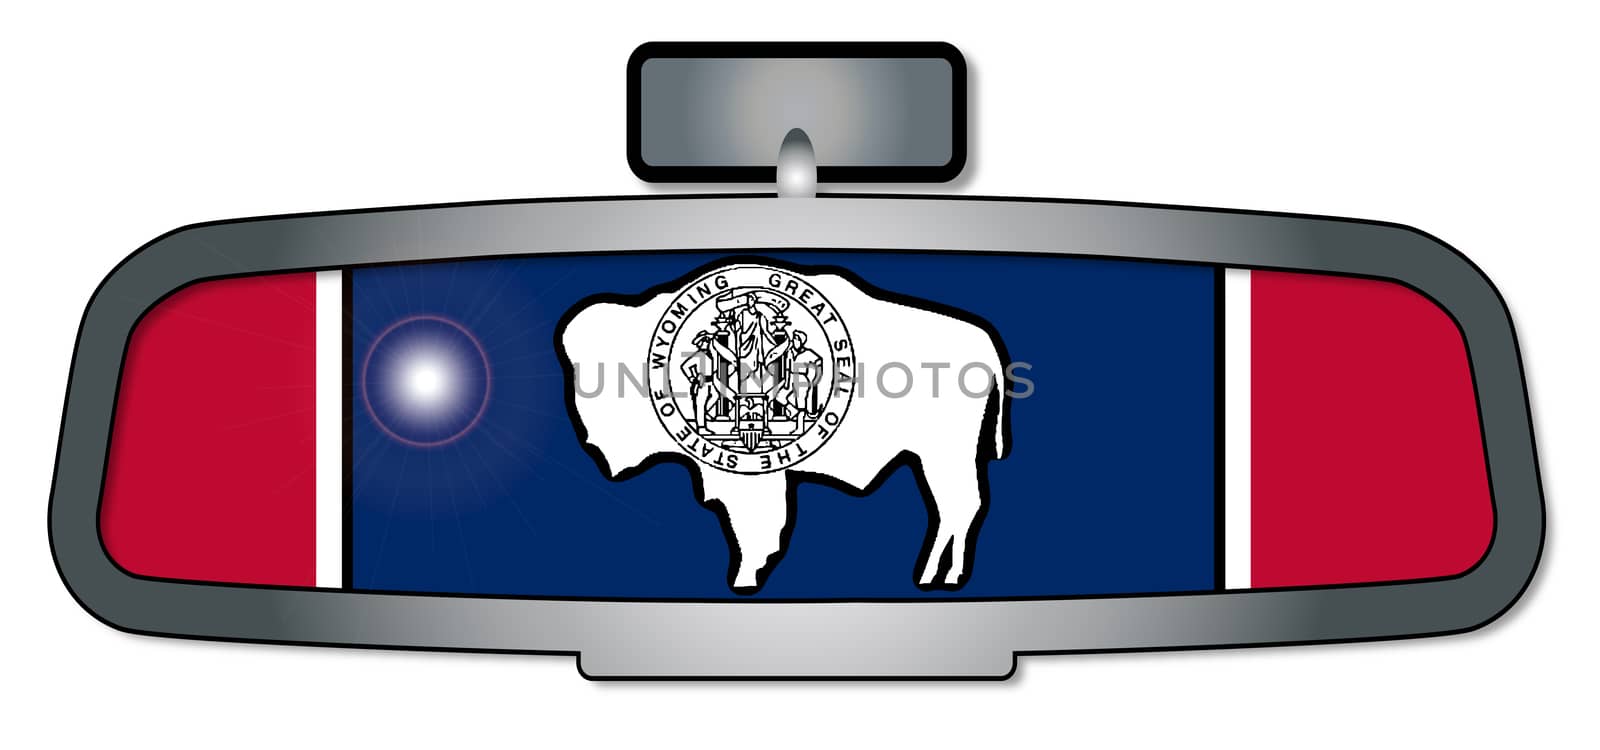 A vehicle rear view mirror with the flag of the state of Wyoming